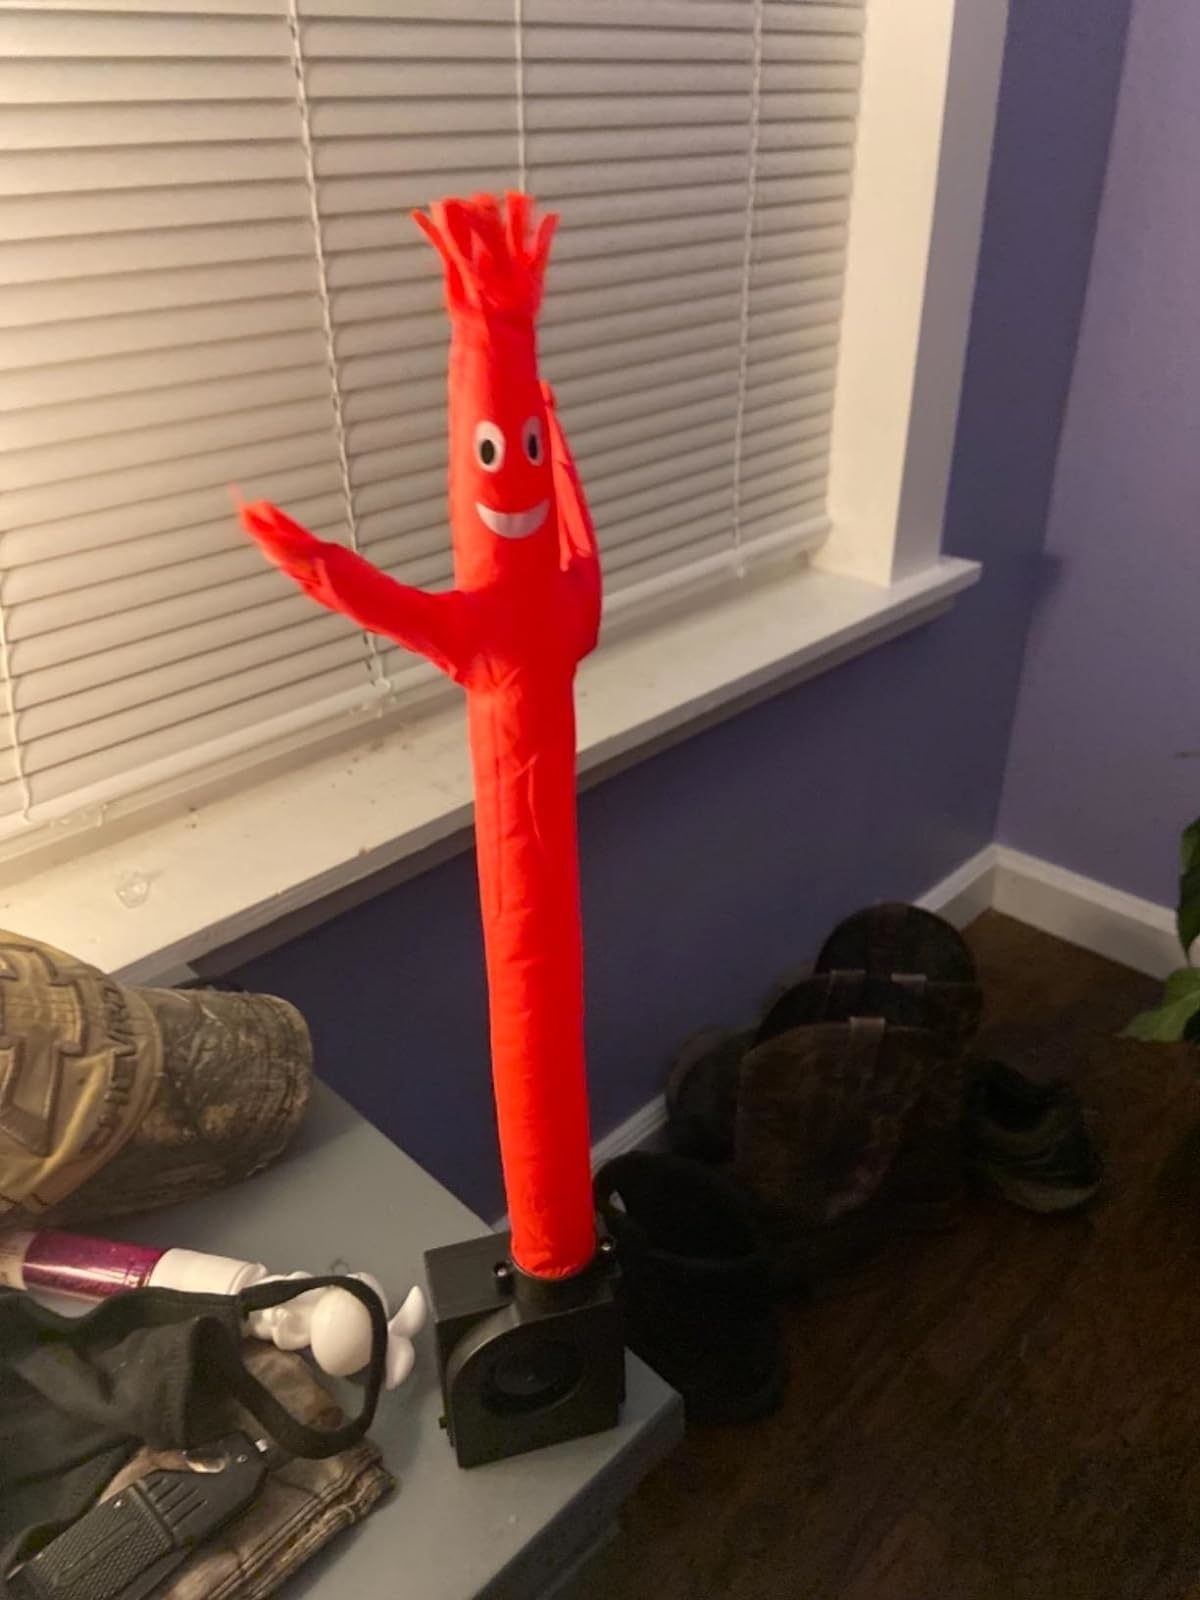 Inflatable tube man decoration indoors next to a window and various items on the floor